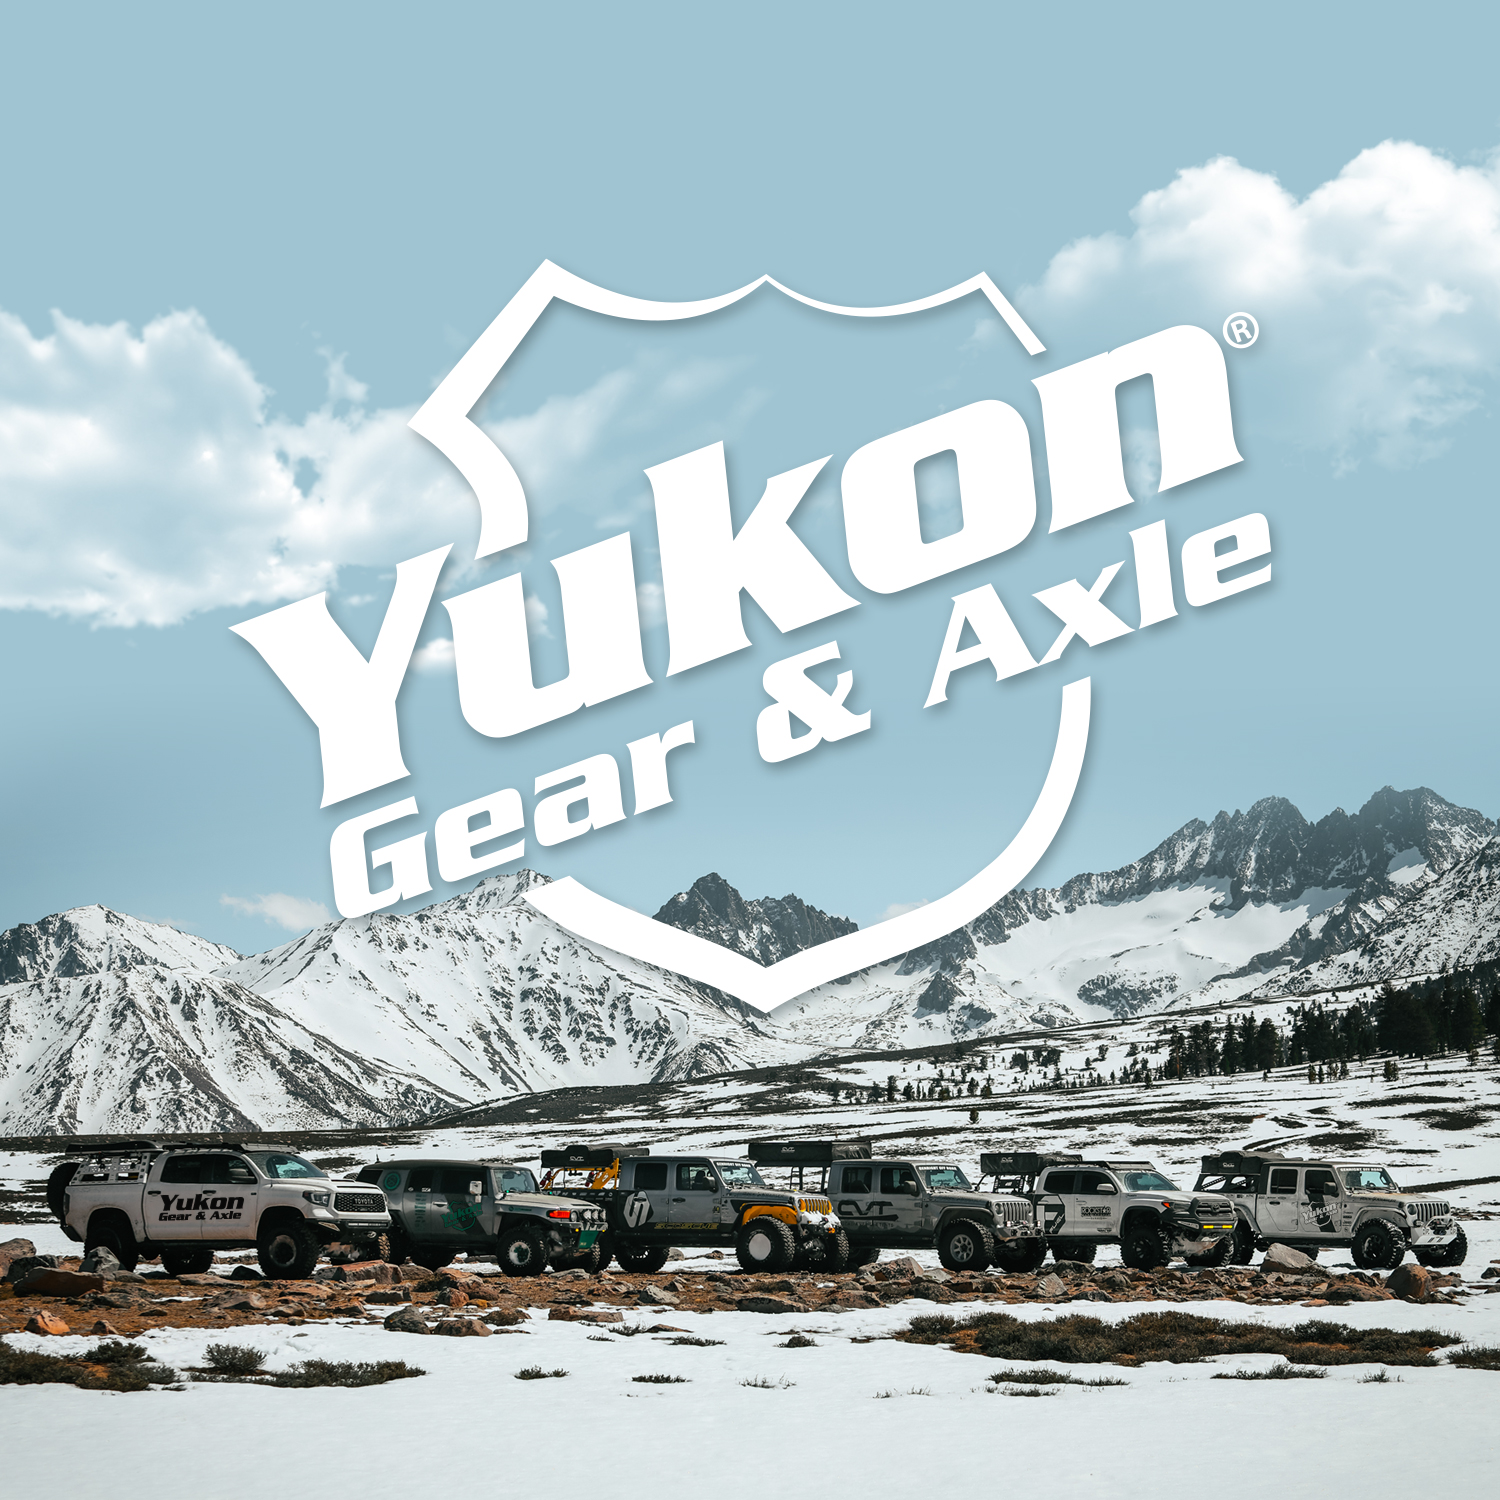 Yukon Bearing install kit for Ford 9" differential, LM102910 bearings 